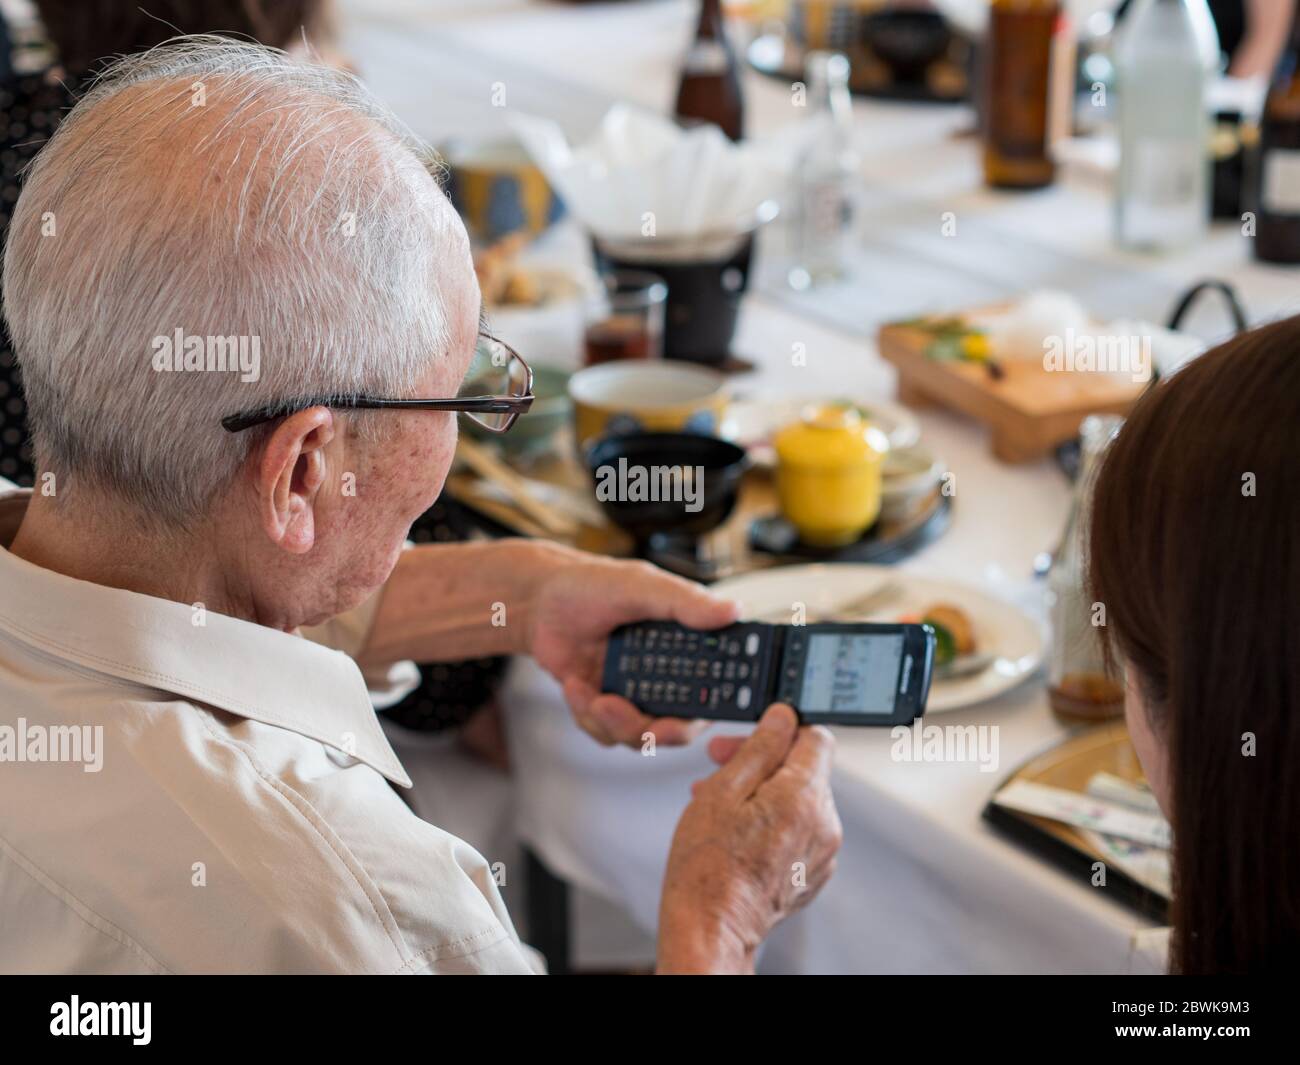 An elderly Asian man struggling to use an old fashioned flip phone Stock Photo